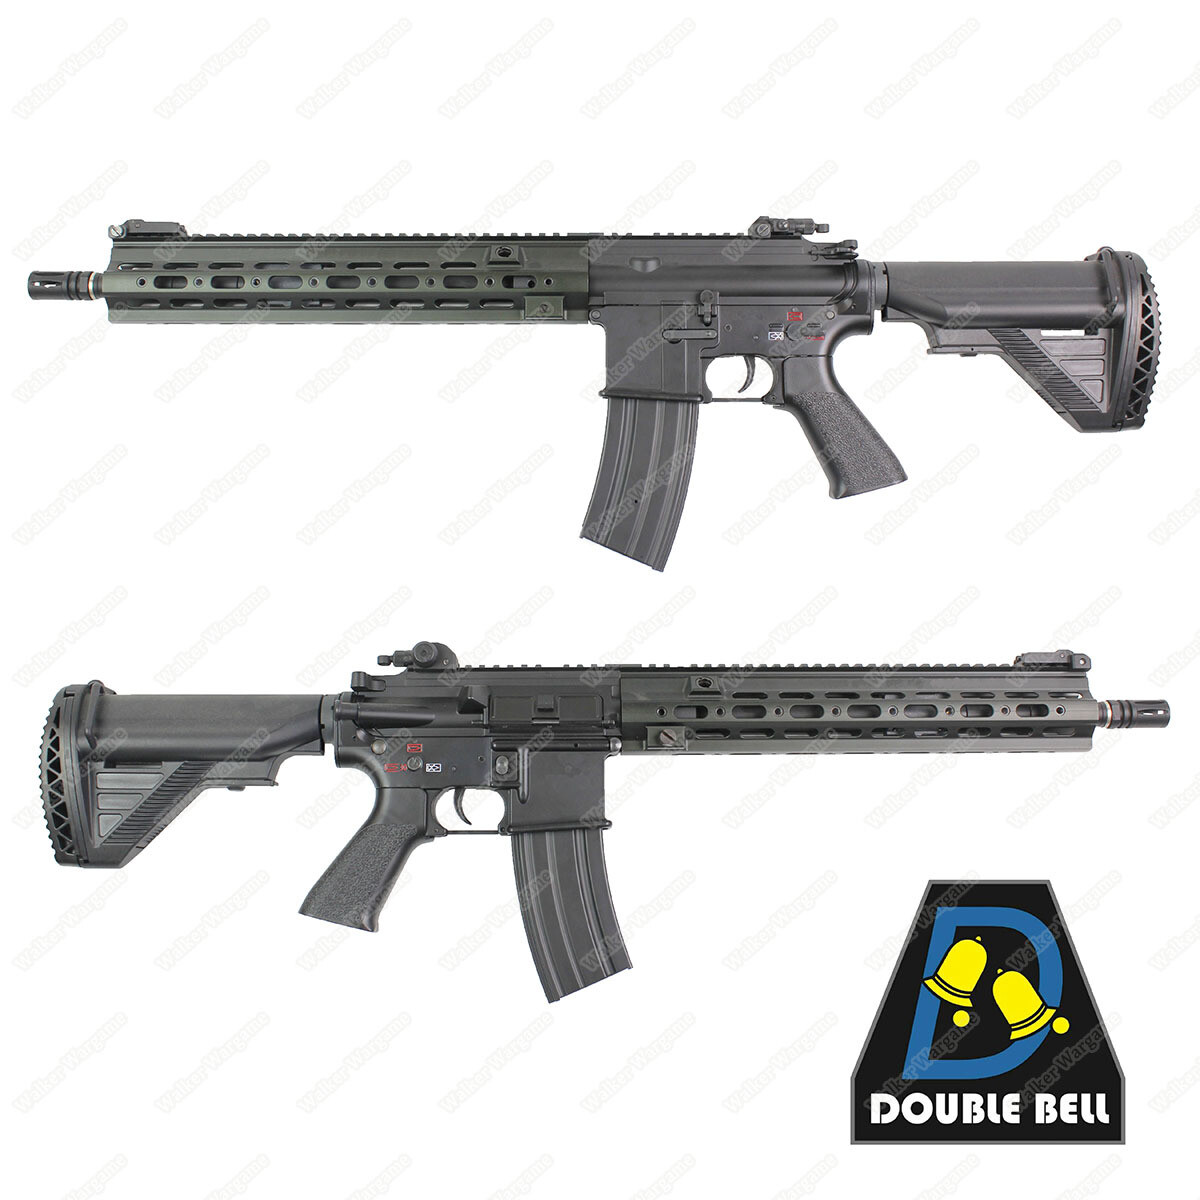 Double Bell 812 Long HK416L Airsoft AEG Rifle